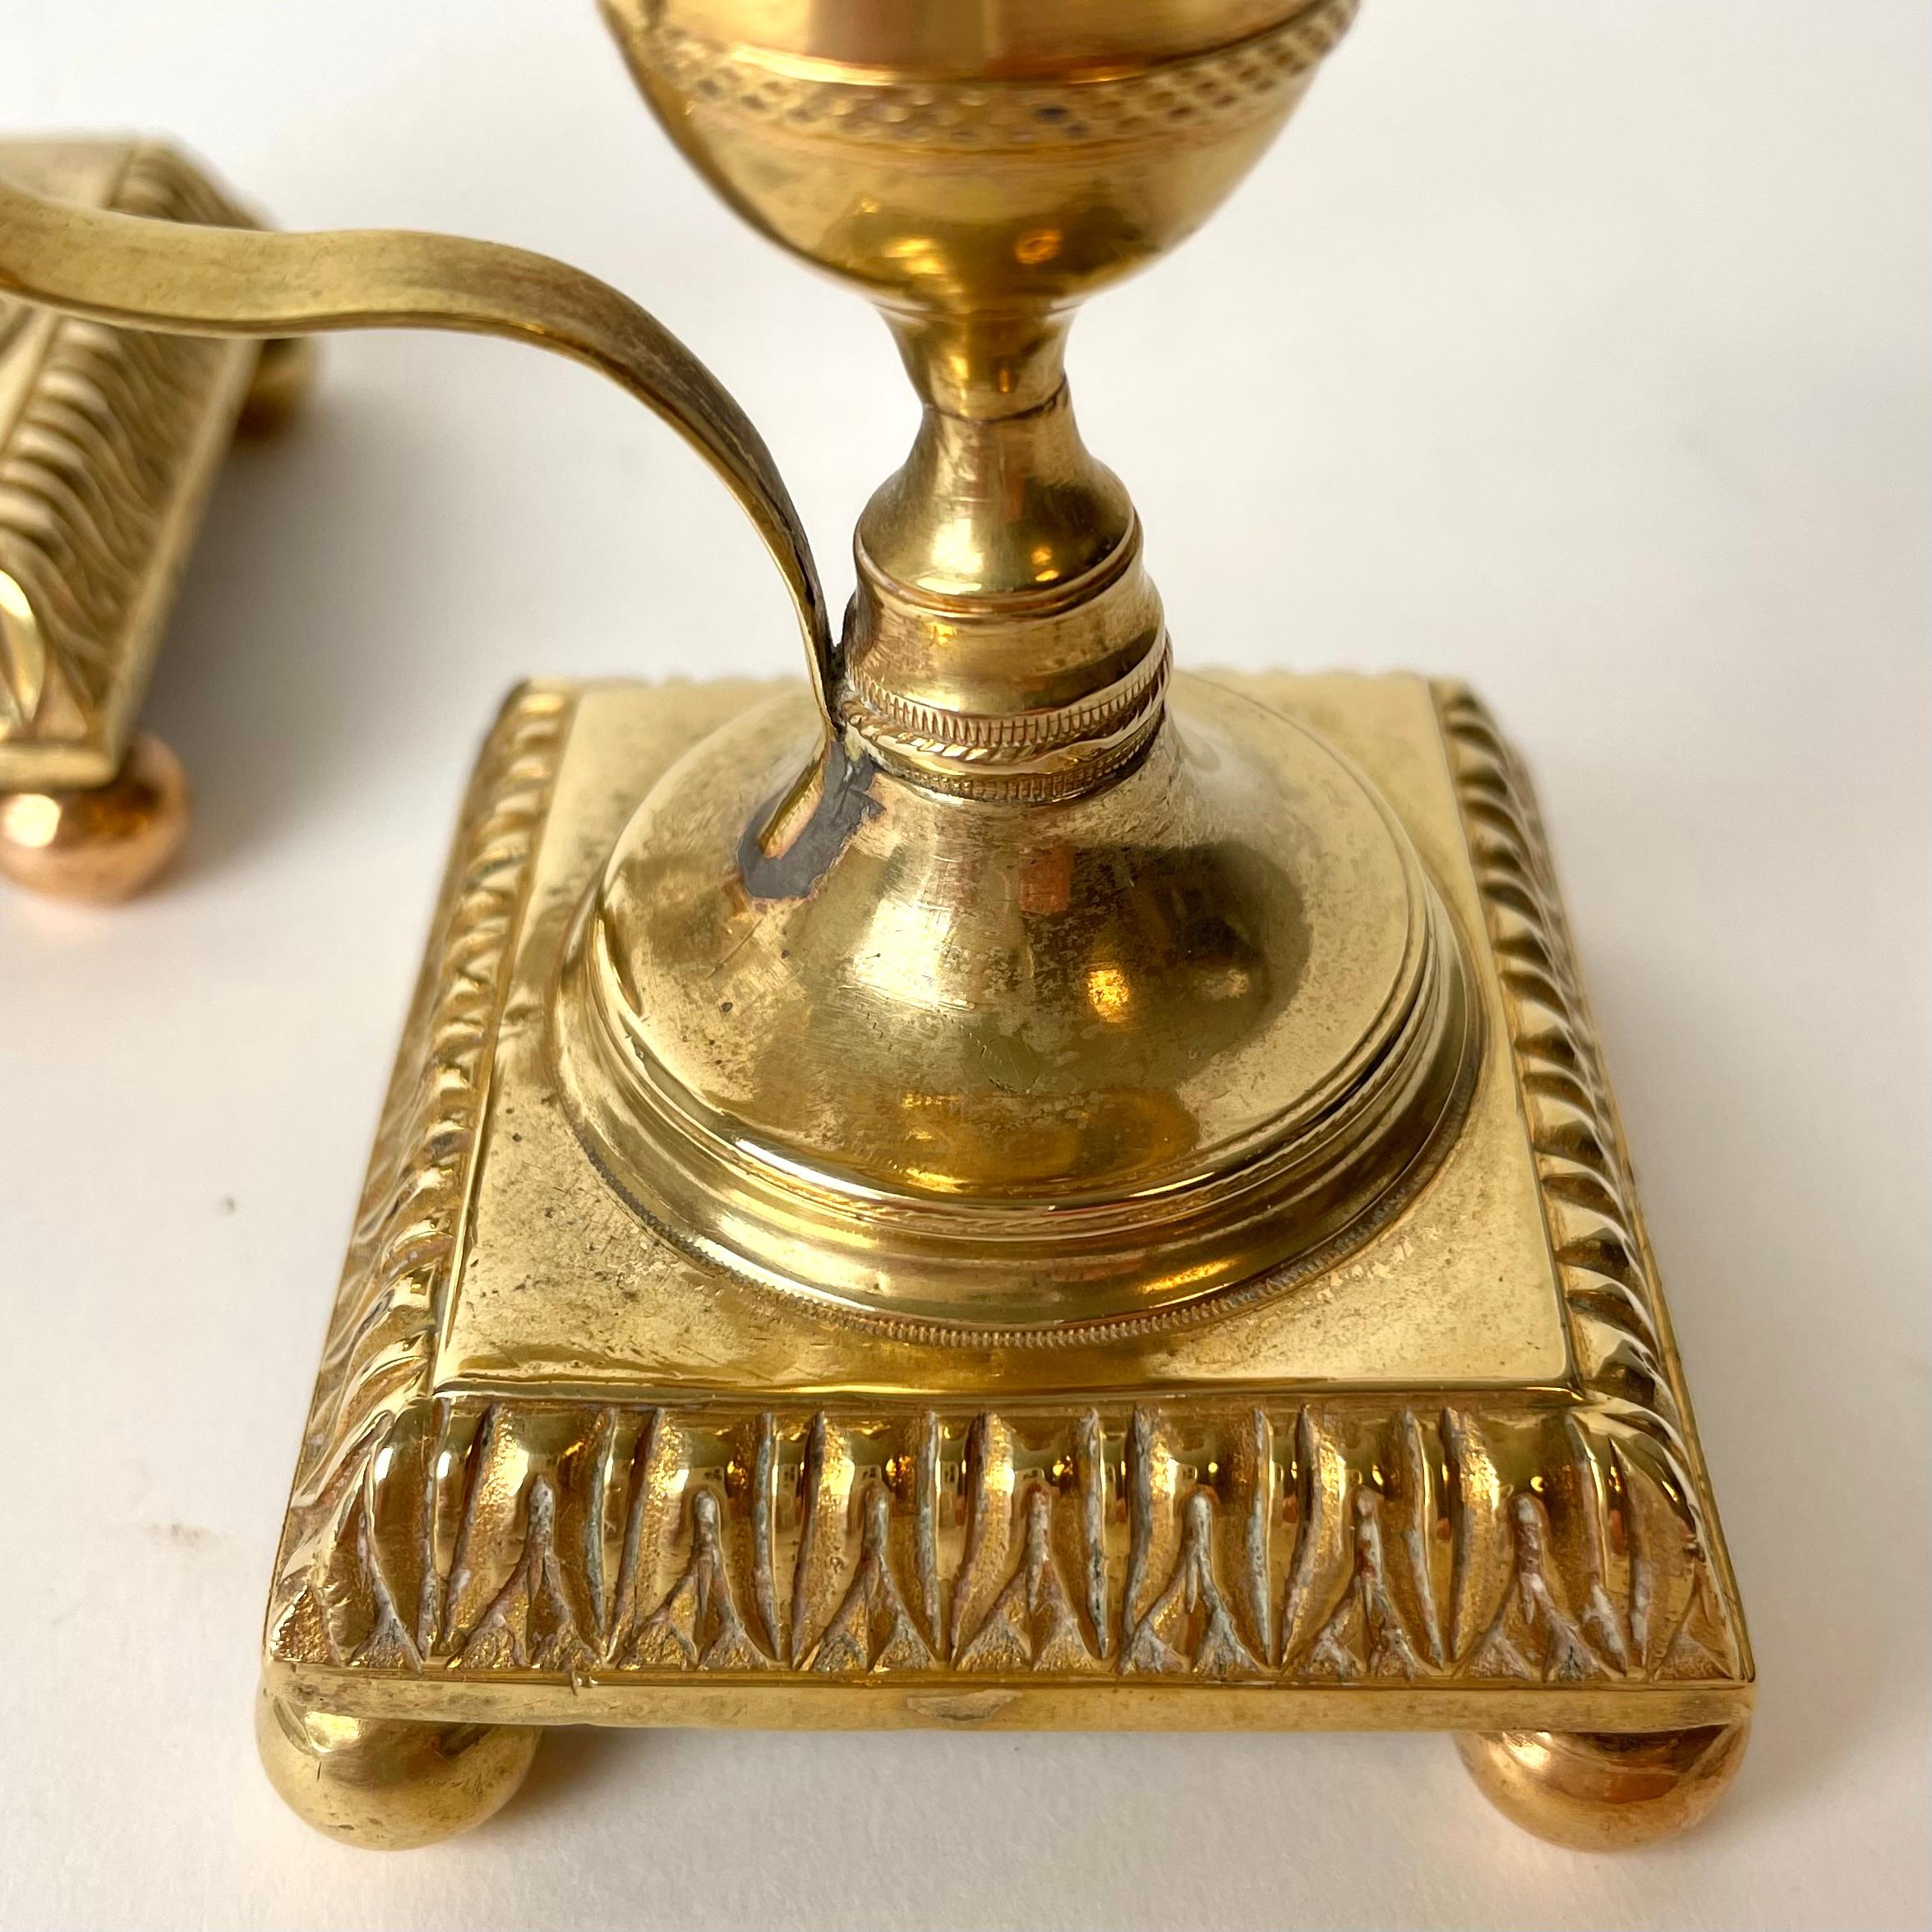 Gold Plate Small Pair of Gustavian Night Candlesticks from the, Late 18th Century For Sale